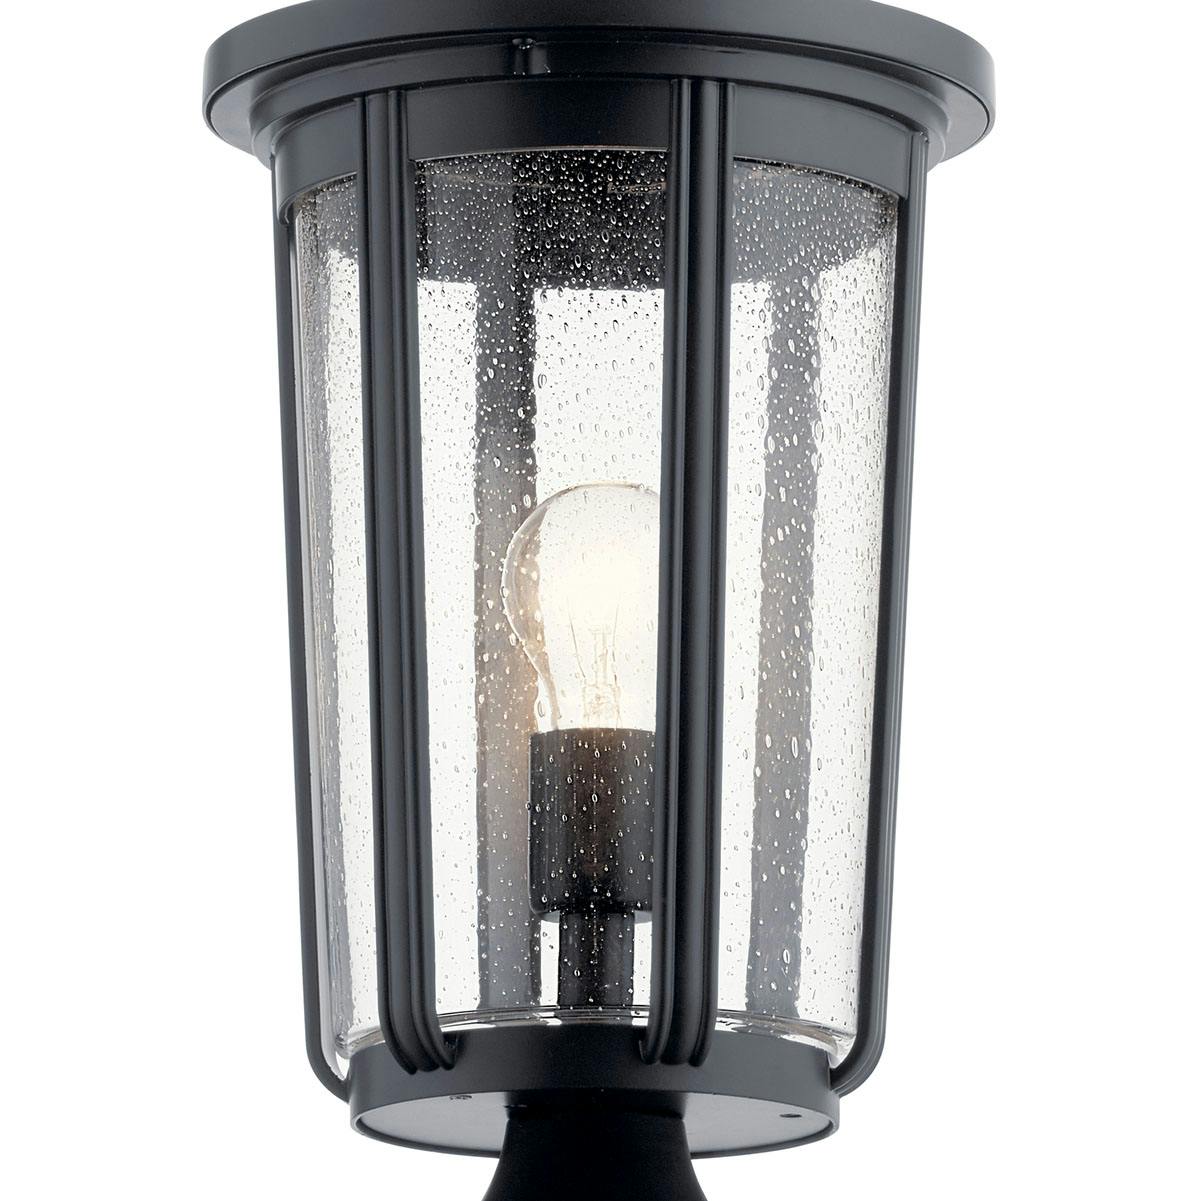 Close up view of the Fairfield 19.25" 1 Light Post Light Black on a white background